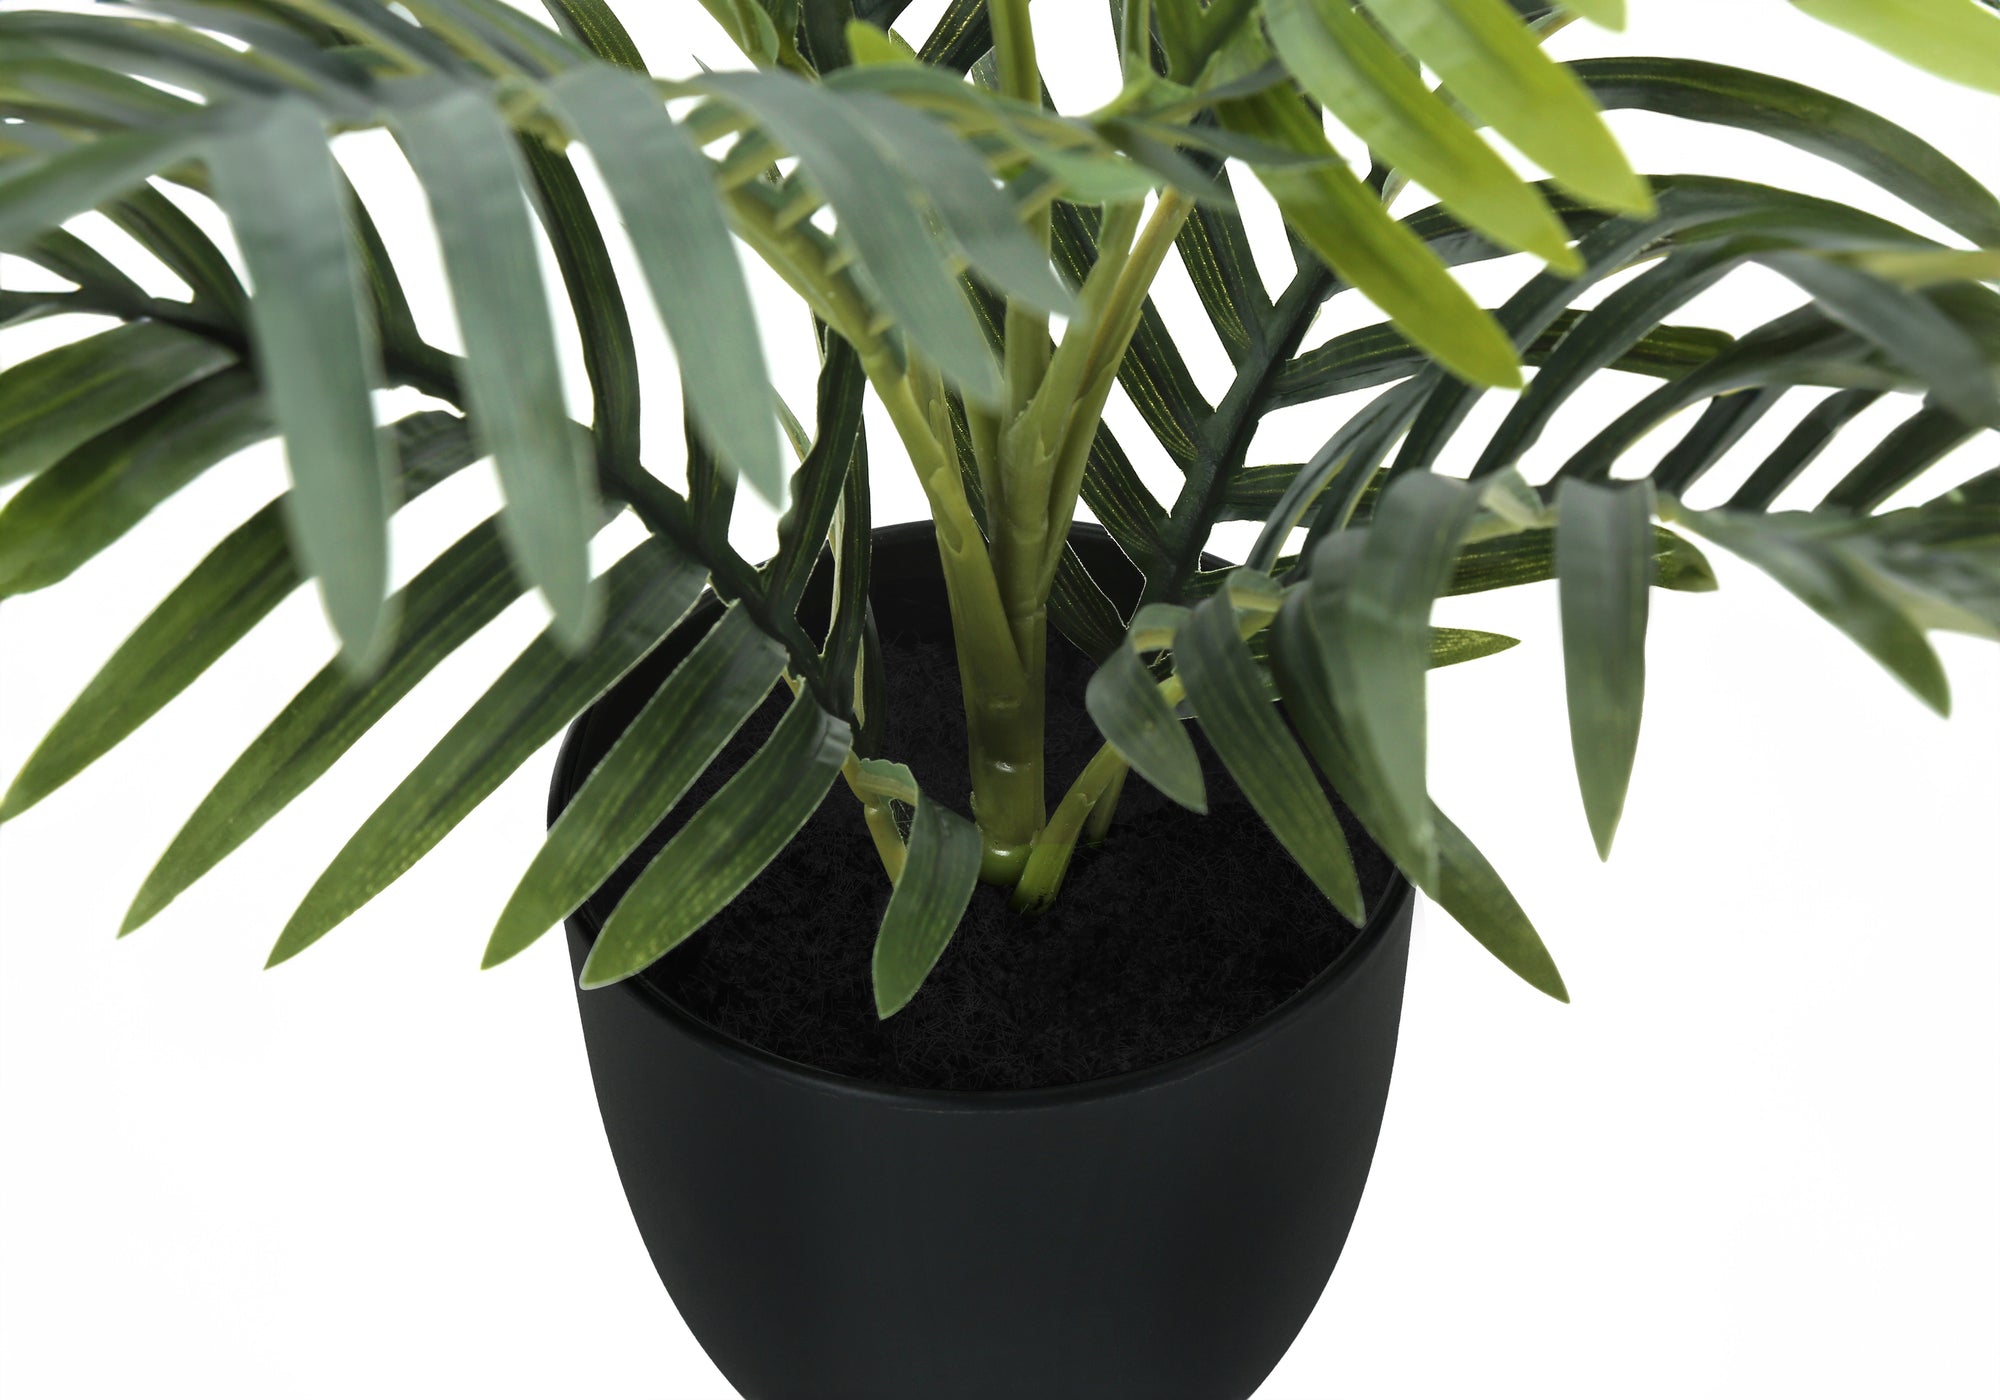 MN-229501    Artificial Plant, 20" Tall, Palm, Indoor, Faux, Fake, Table, Greenery, Potted, Real Touch, Decorative, Green Leaves, Black Pot